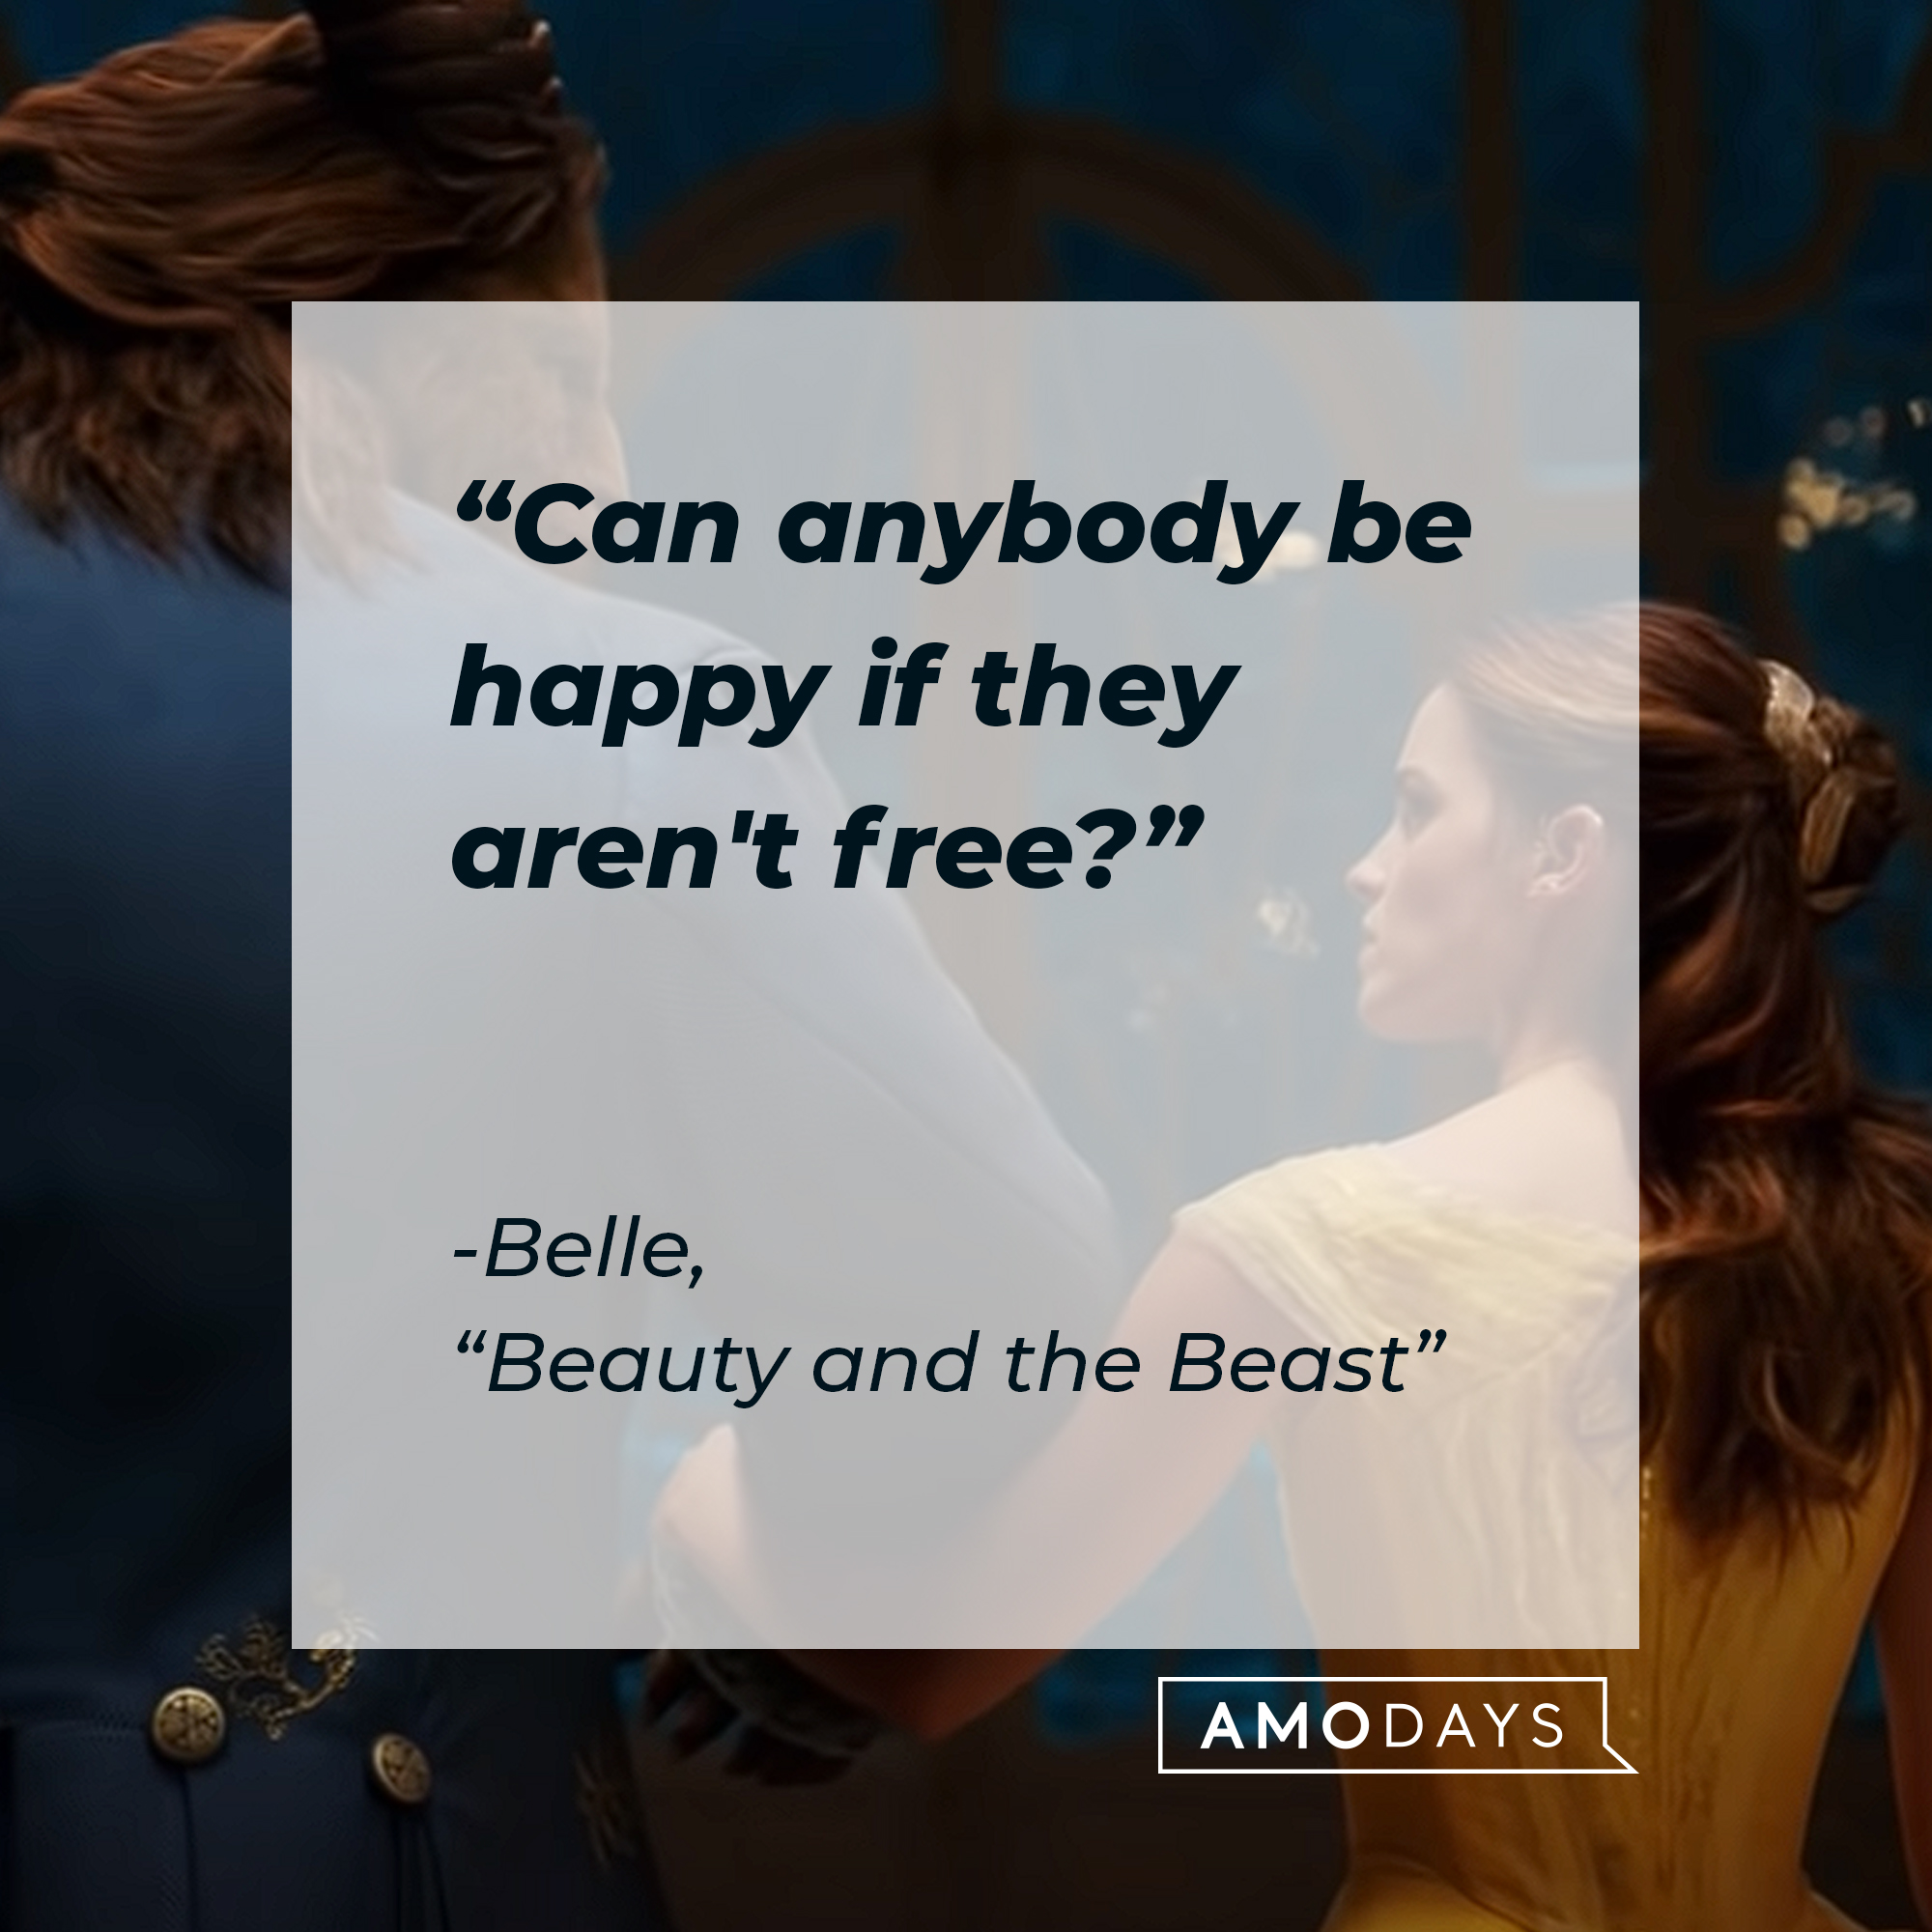 Belle's "Beauty And The Beast" quote: "Can anybody be happy if they aren't free?" | Source: Youtube.com/DisneyMovieTrailers